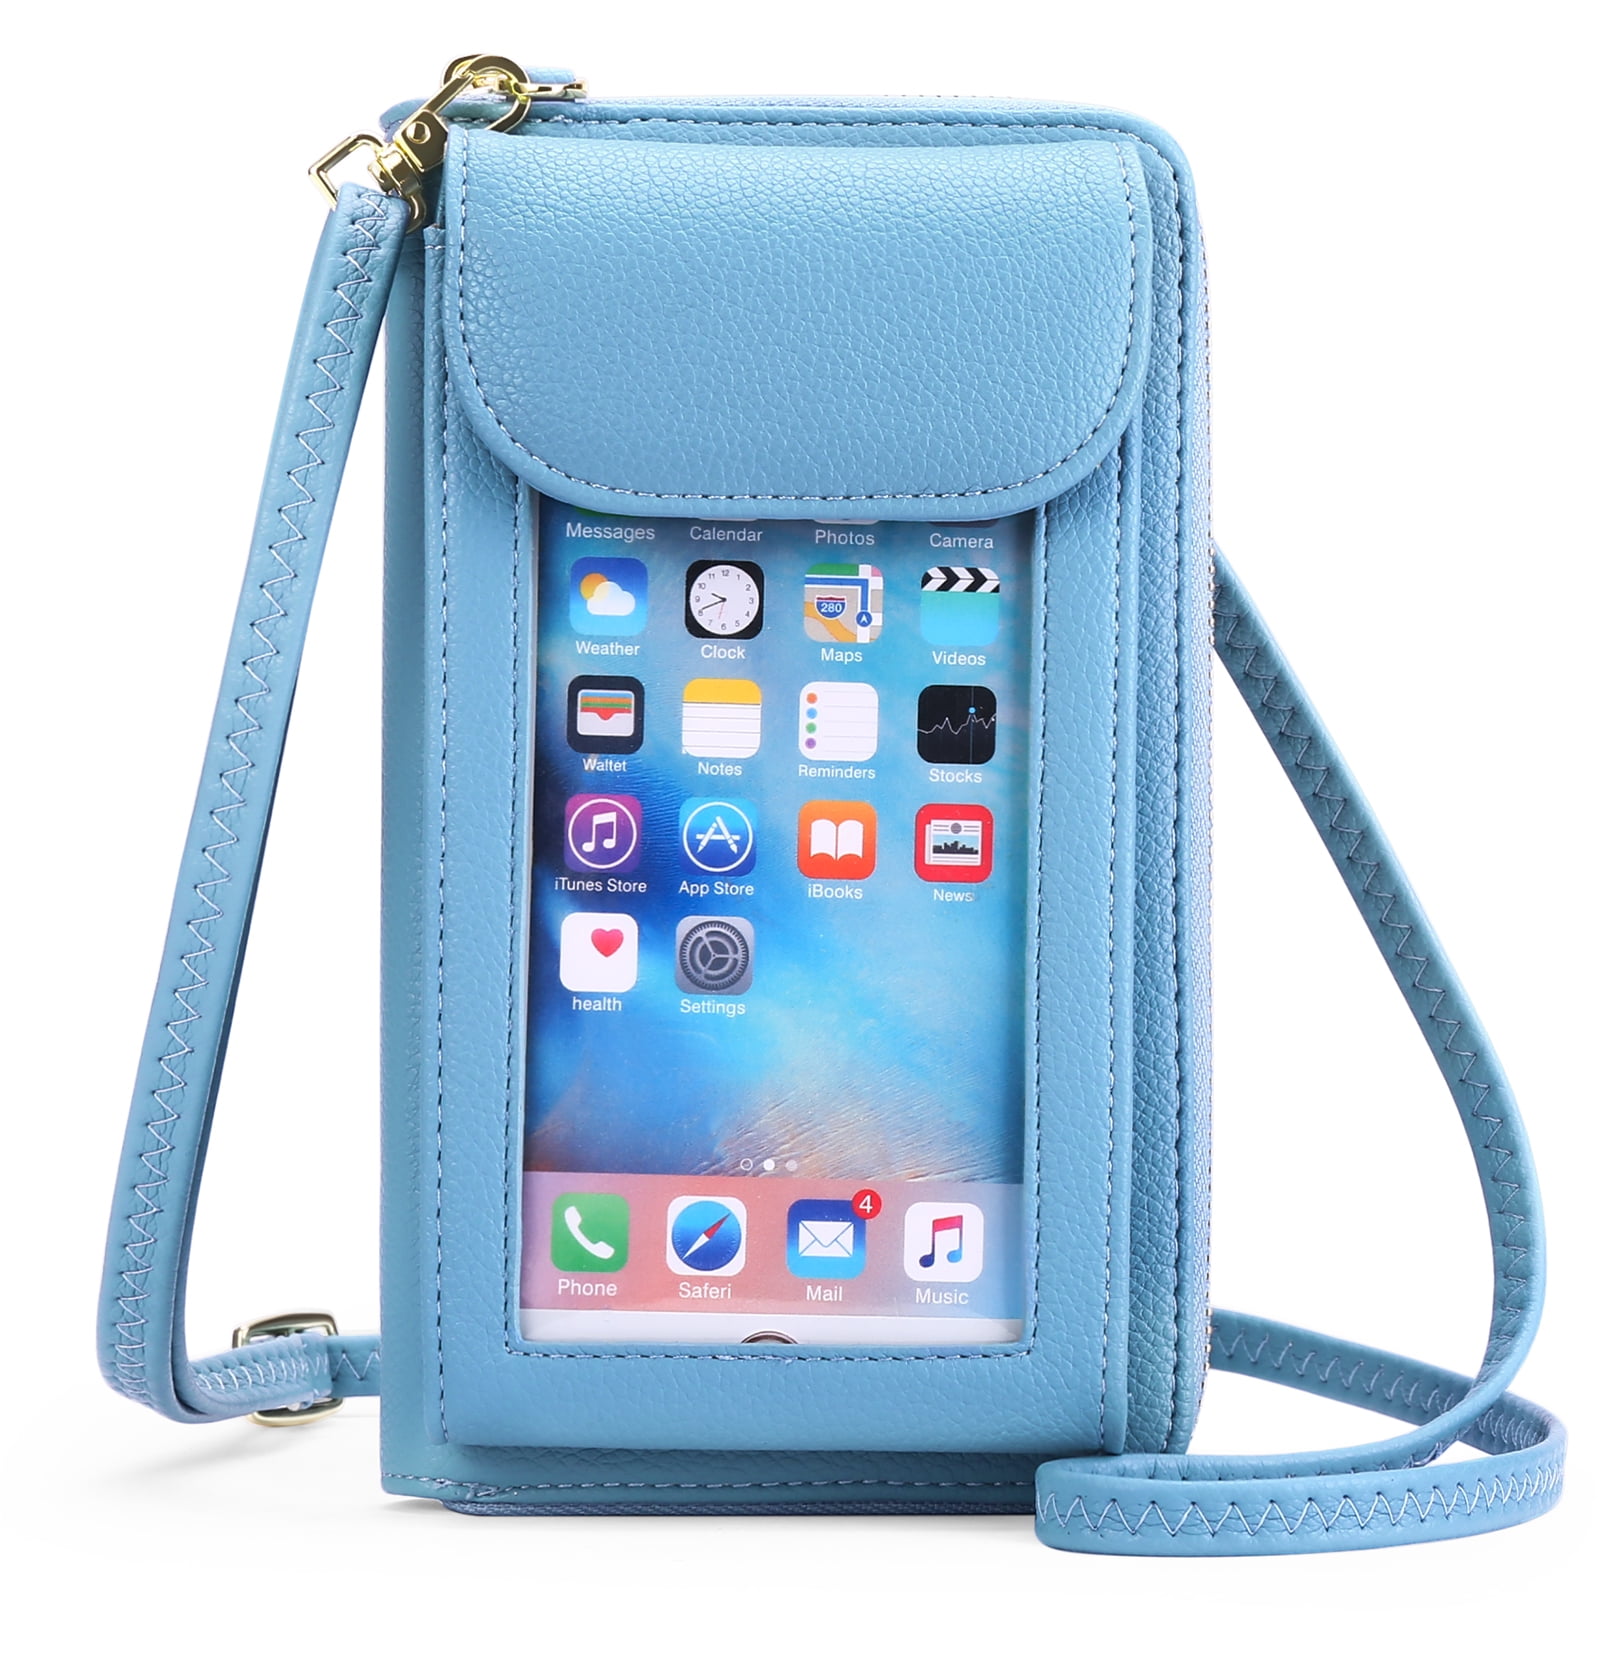 FALAN MULE Small Cell Phone Crossbody Bag Purse for Women PU Leather Wallet Purse cacf2a18 7409 4361 9297 5b07aa8c43a9.a61c213932f993e8d944d1089a7a821f